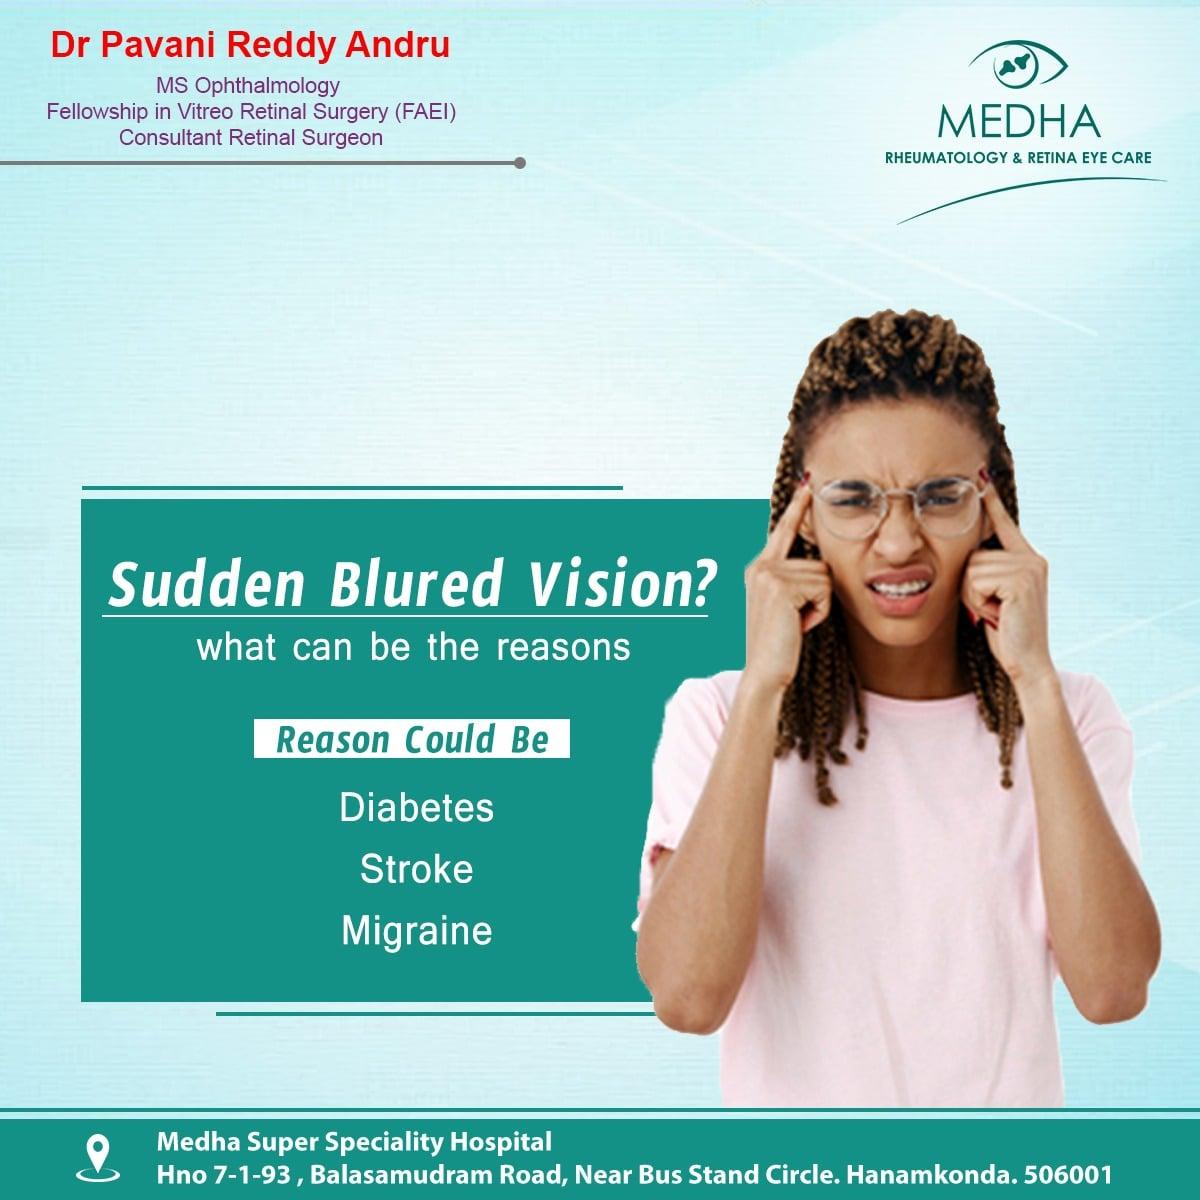 Reasons for sudden blurred vision